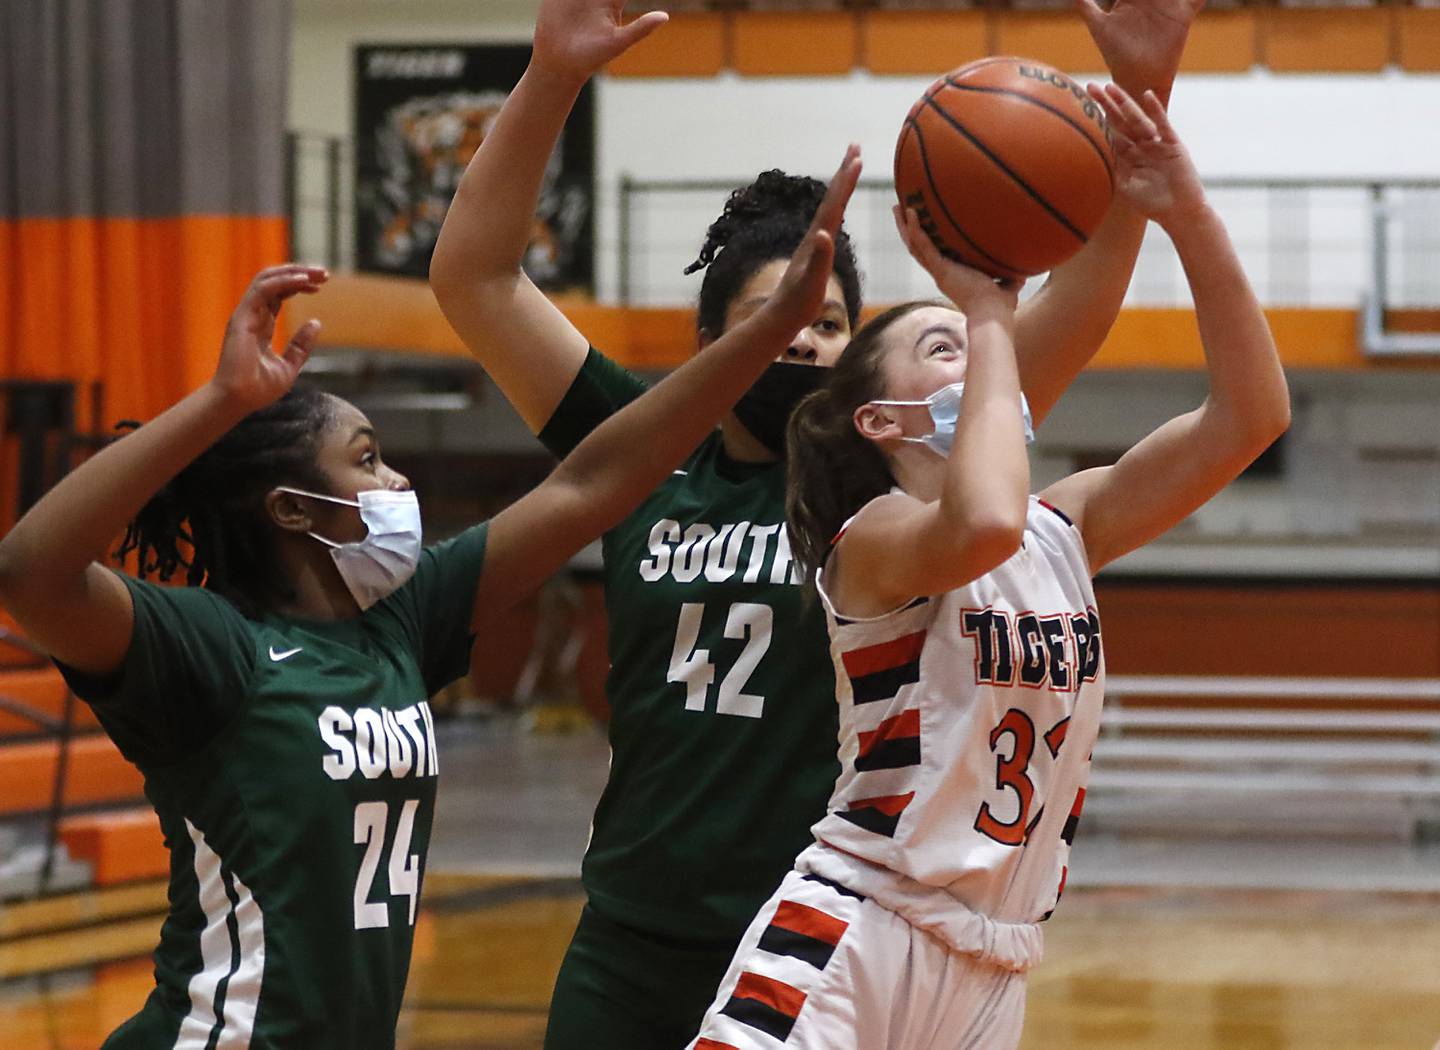 Crystal Lake Central's Kathryn Hamill, right, shoots the ball between Crystal Lake South's Kree Nunnally, left, and Nicole Molgado, center, during a Fox Valley Conference game Wednesday, Jan. 26, 2022, between Crystal Lake South and Crystal Lake Central at Crystal Lake Central High School.